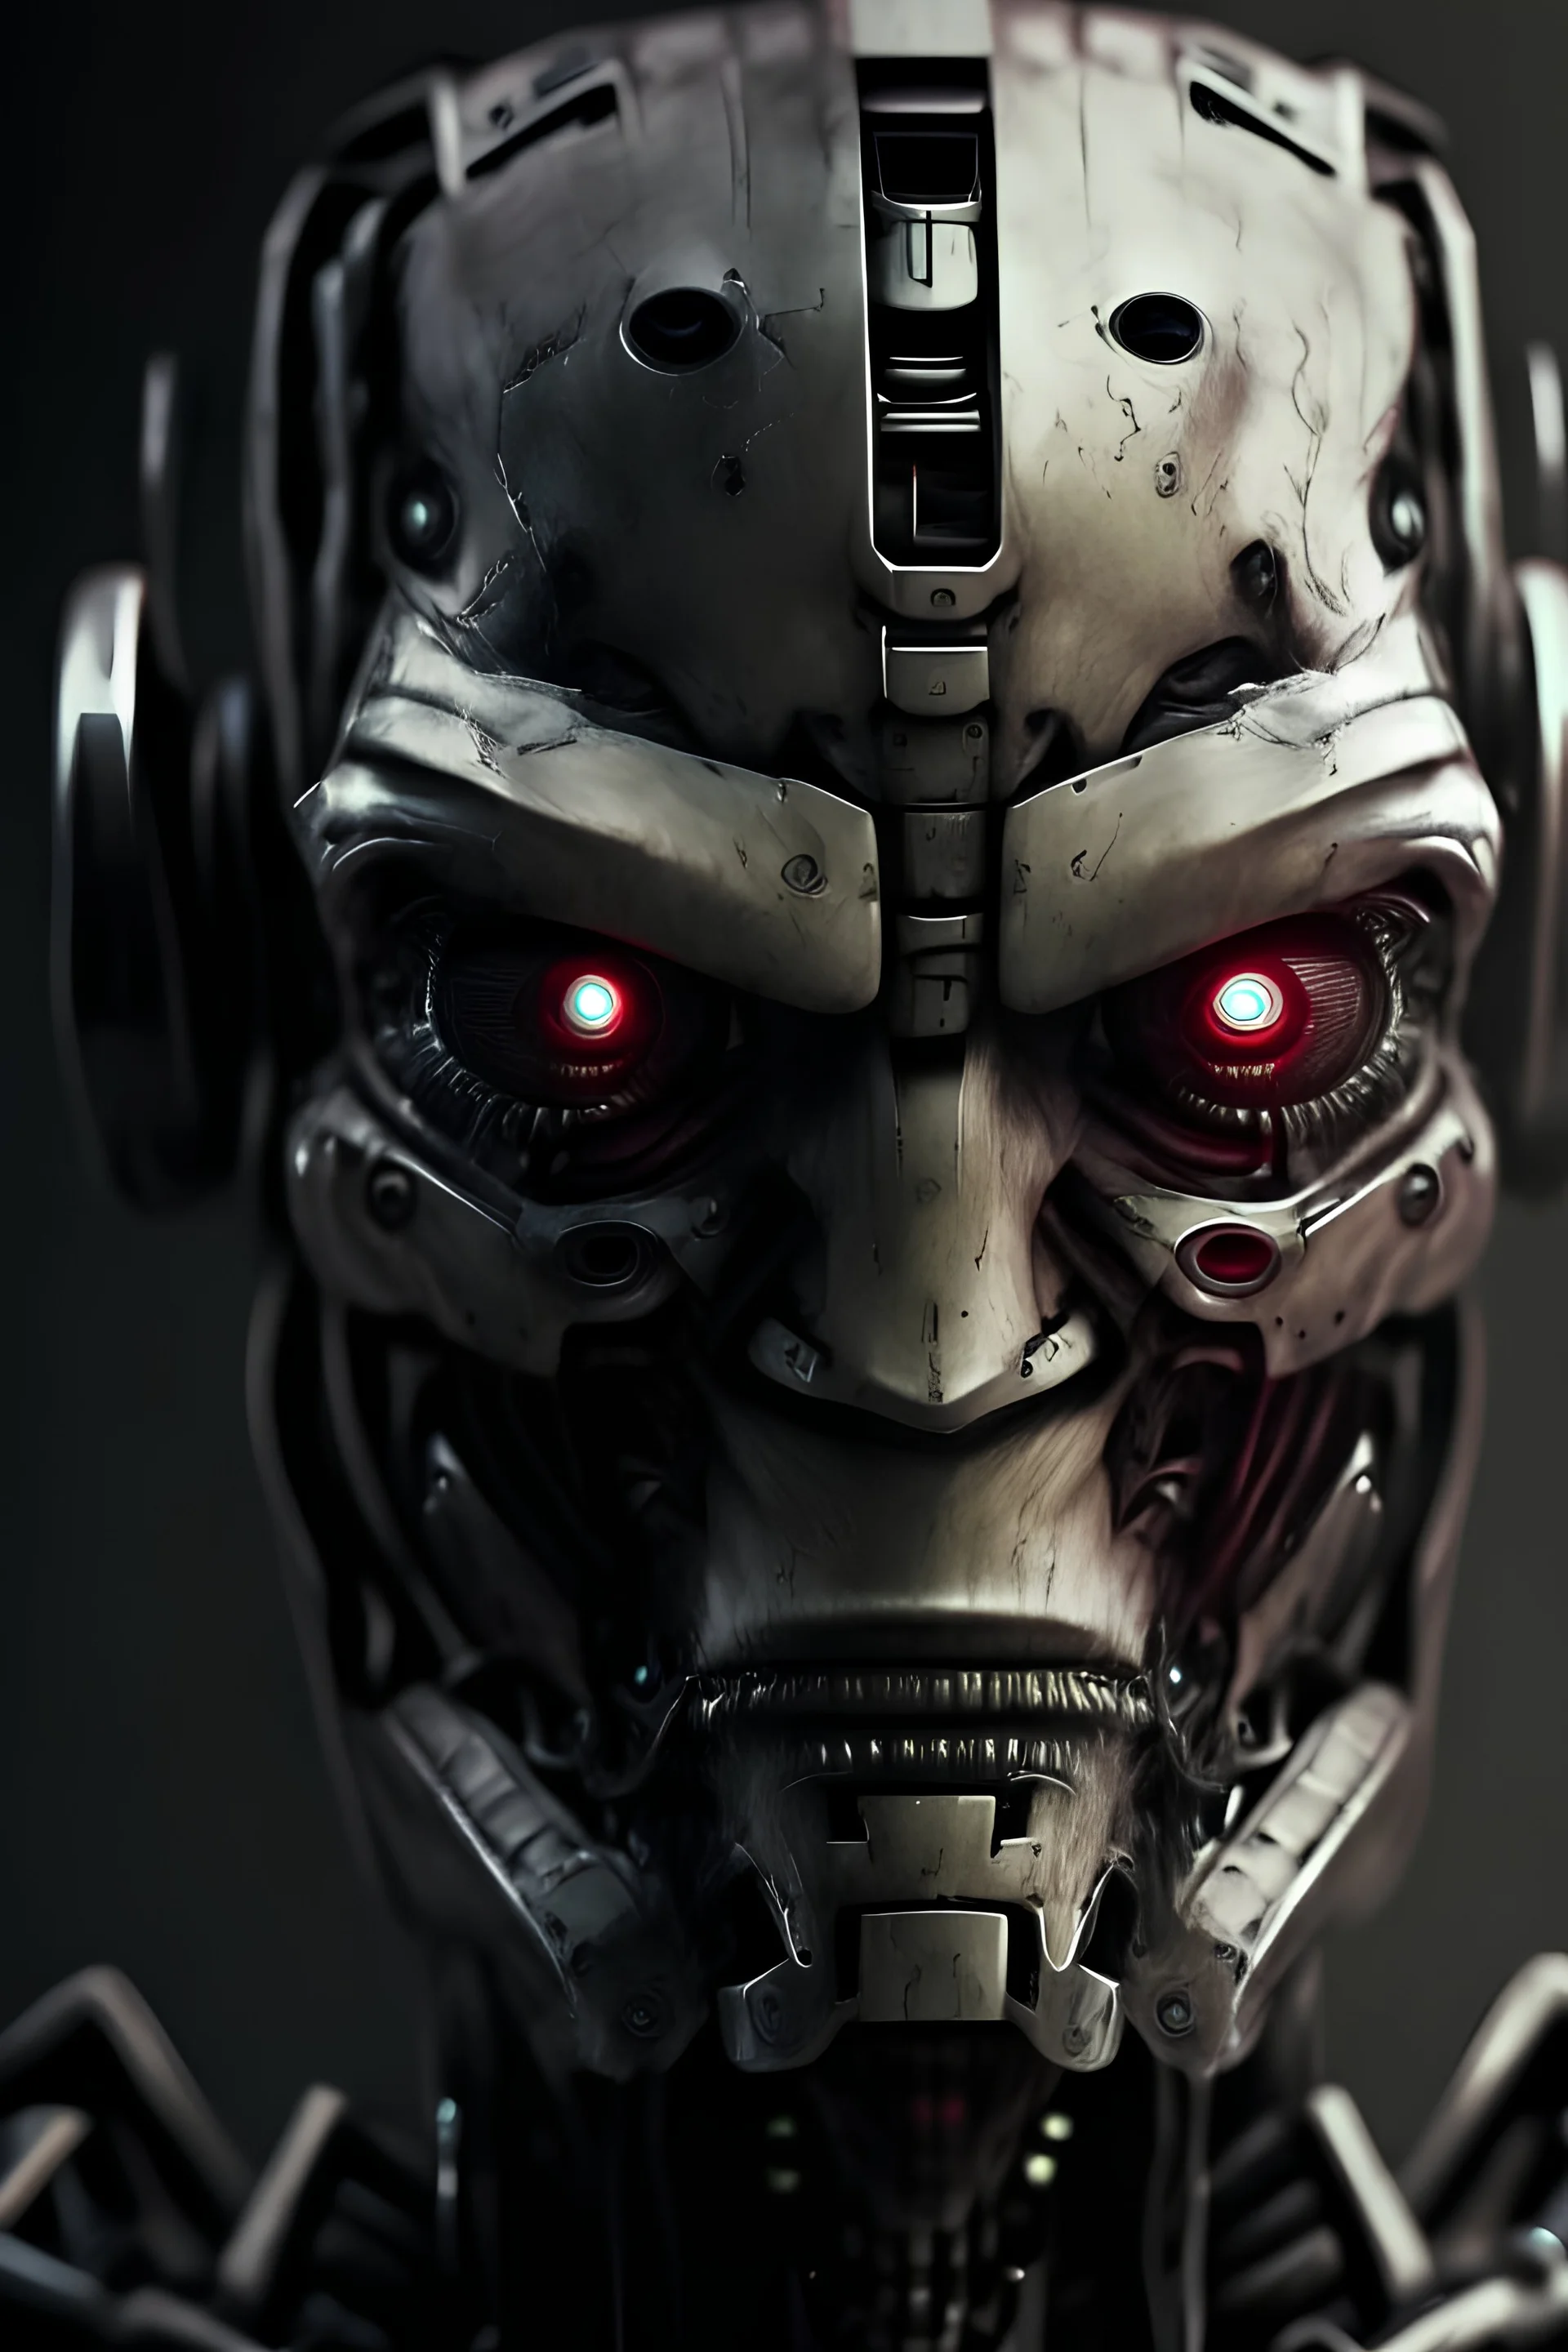 face of robot seen from the side with evil expression